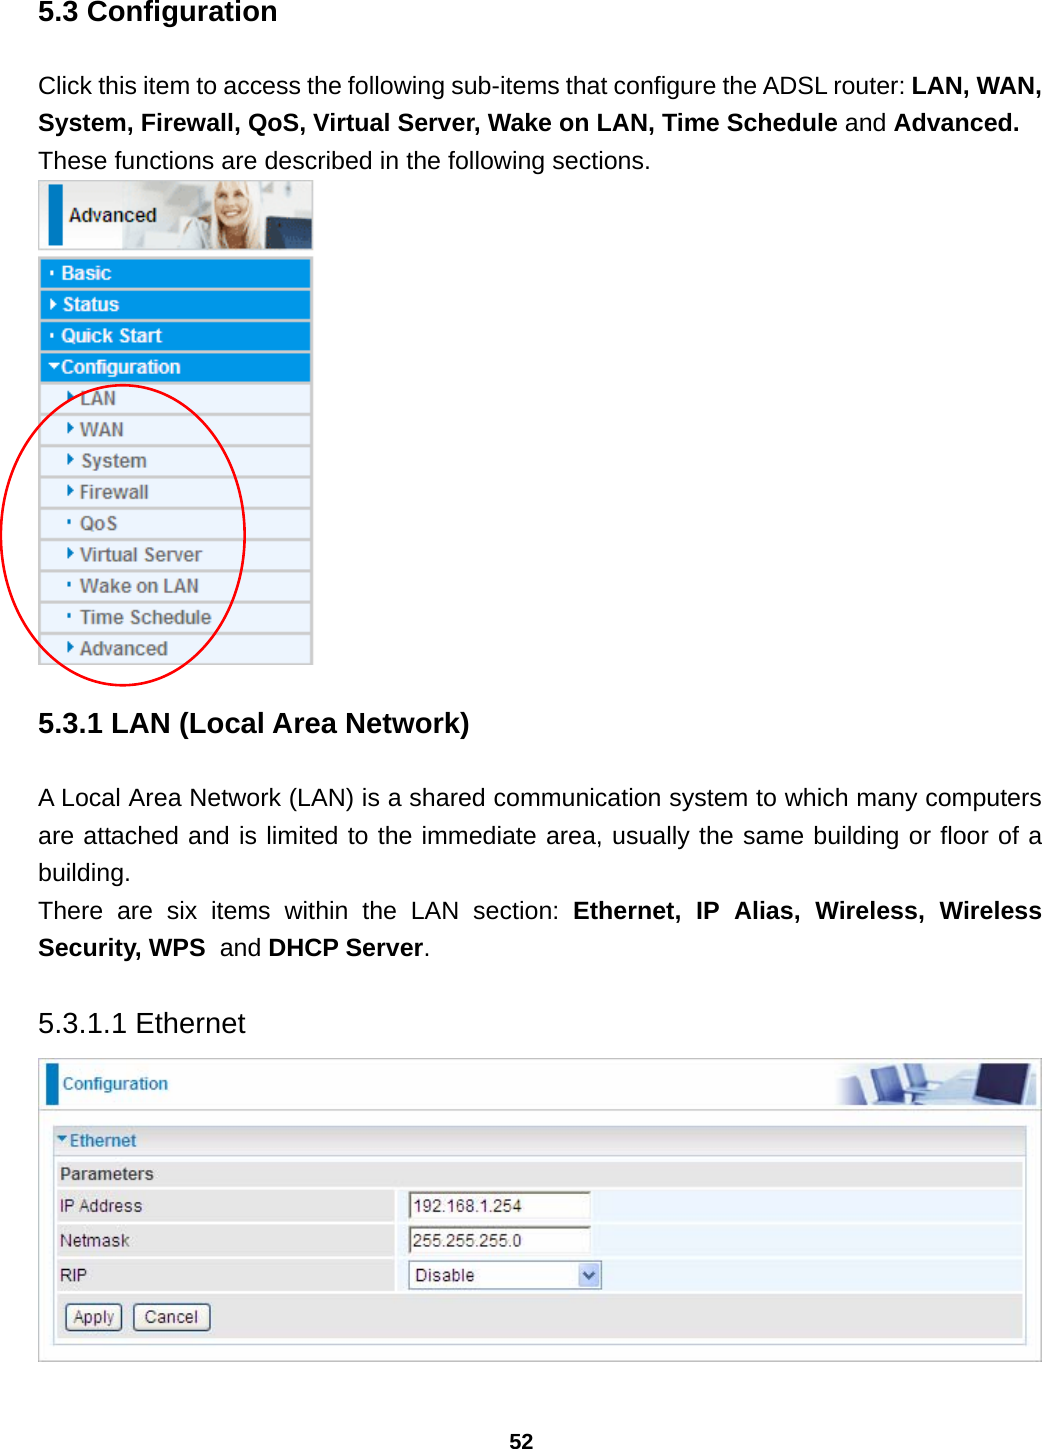 52 5.3 Configuration Click this item to access the following sub-items that configure the ADSL router: LAN, WAN, System, Firewall, QoS, Virtual Server, Wake on LAN, Time Schedule and Advanced. These functions are described in the following sections.  5.3.1 LAN (Local Area Network) A Local Area Network (LAN) is a shared communication system to which many computers are attached and is limited to the immediate area, usually the same building or floor of a building. There are six items within the LAN section: Ethernet, IP Alias, Wireless, Wireless Security, WPS  and DHCP Server.  5.3.1.1 Ethernet   